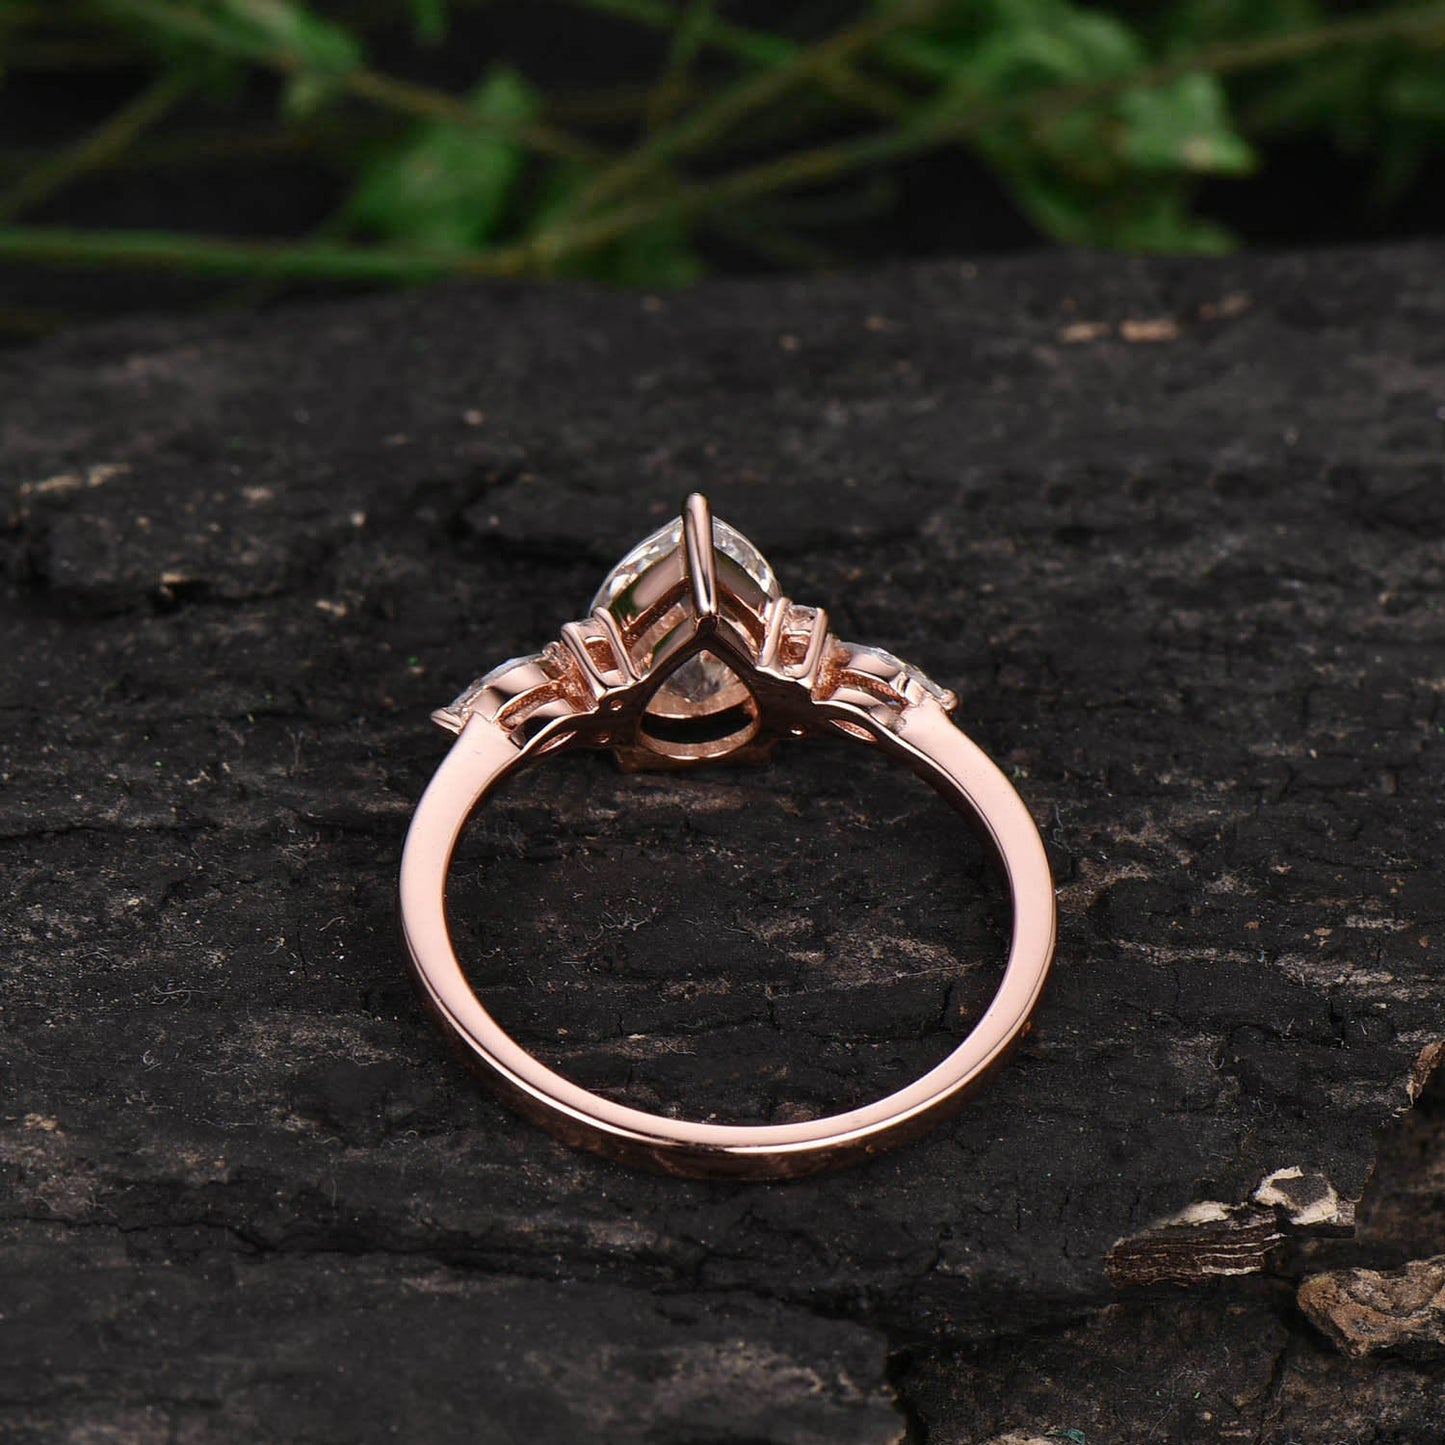 Pear shaped moonstone ring vintage moonstone engagement ring unique moissanite ring for women rose gold ring June birthstone jewelry gift